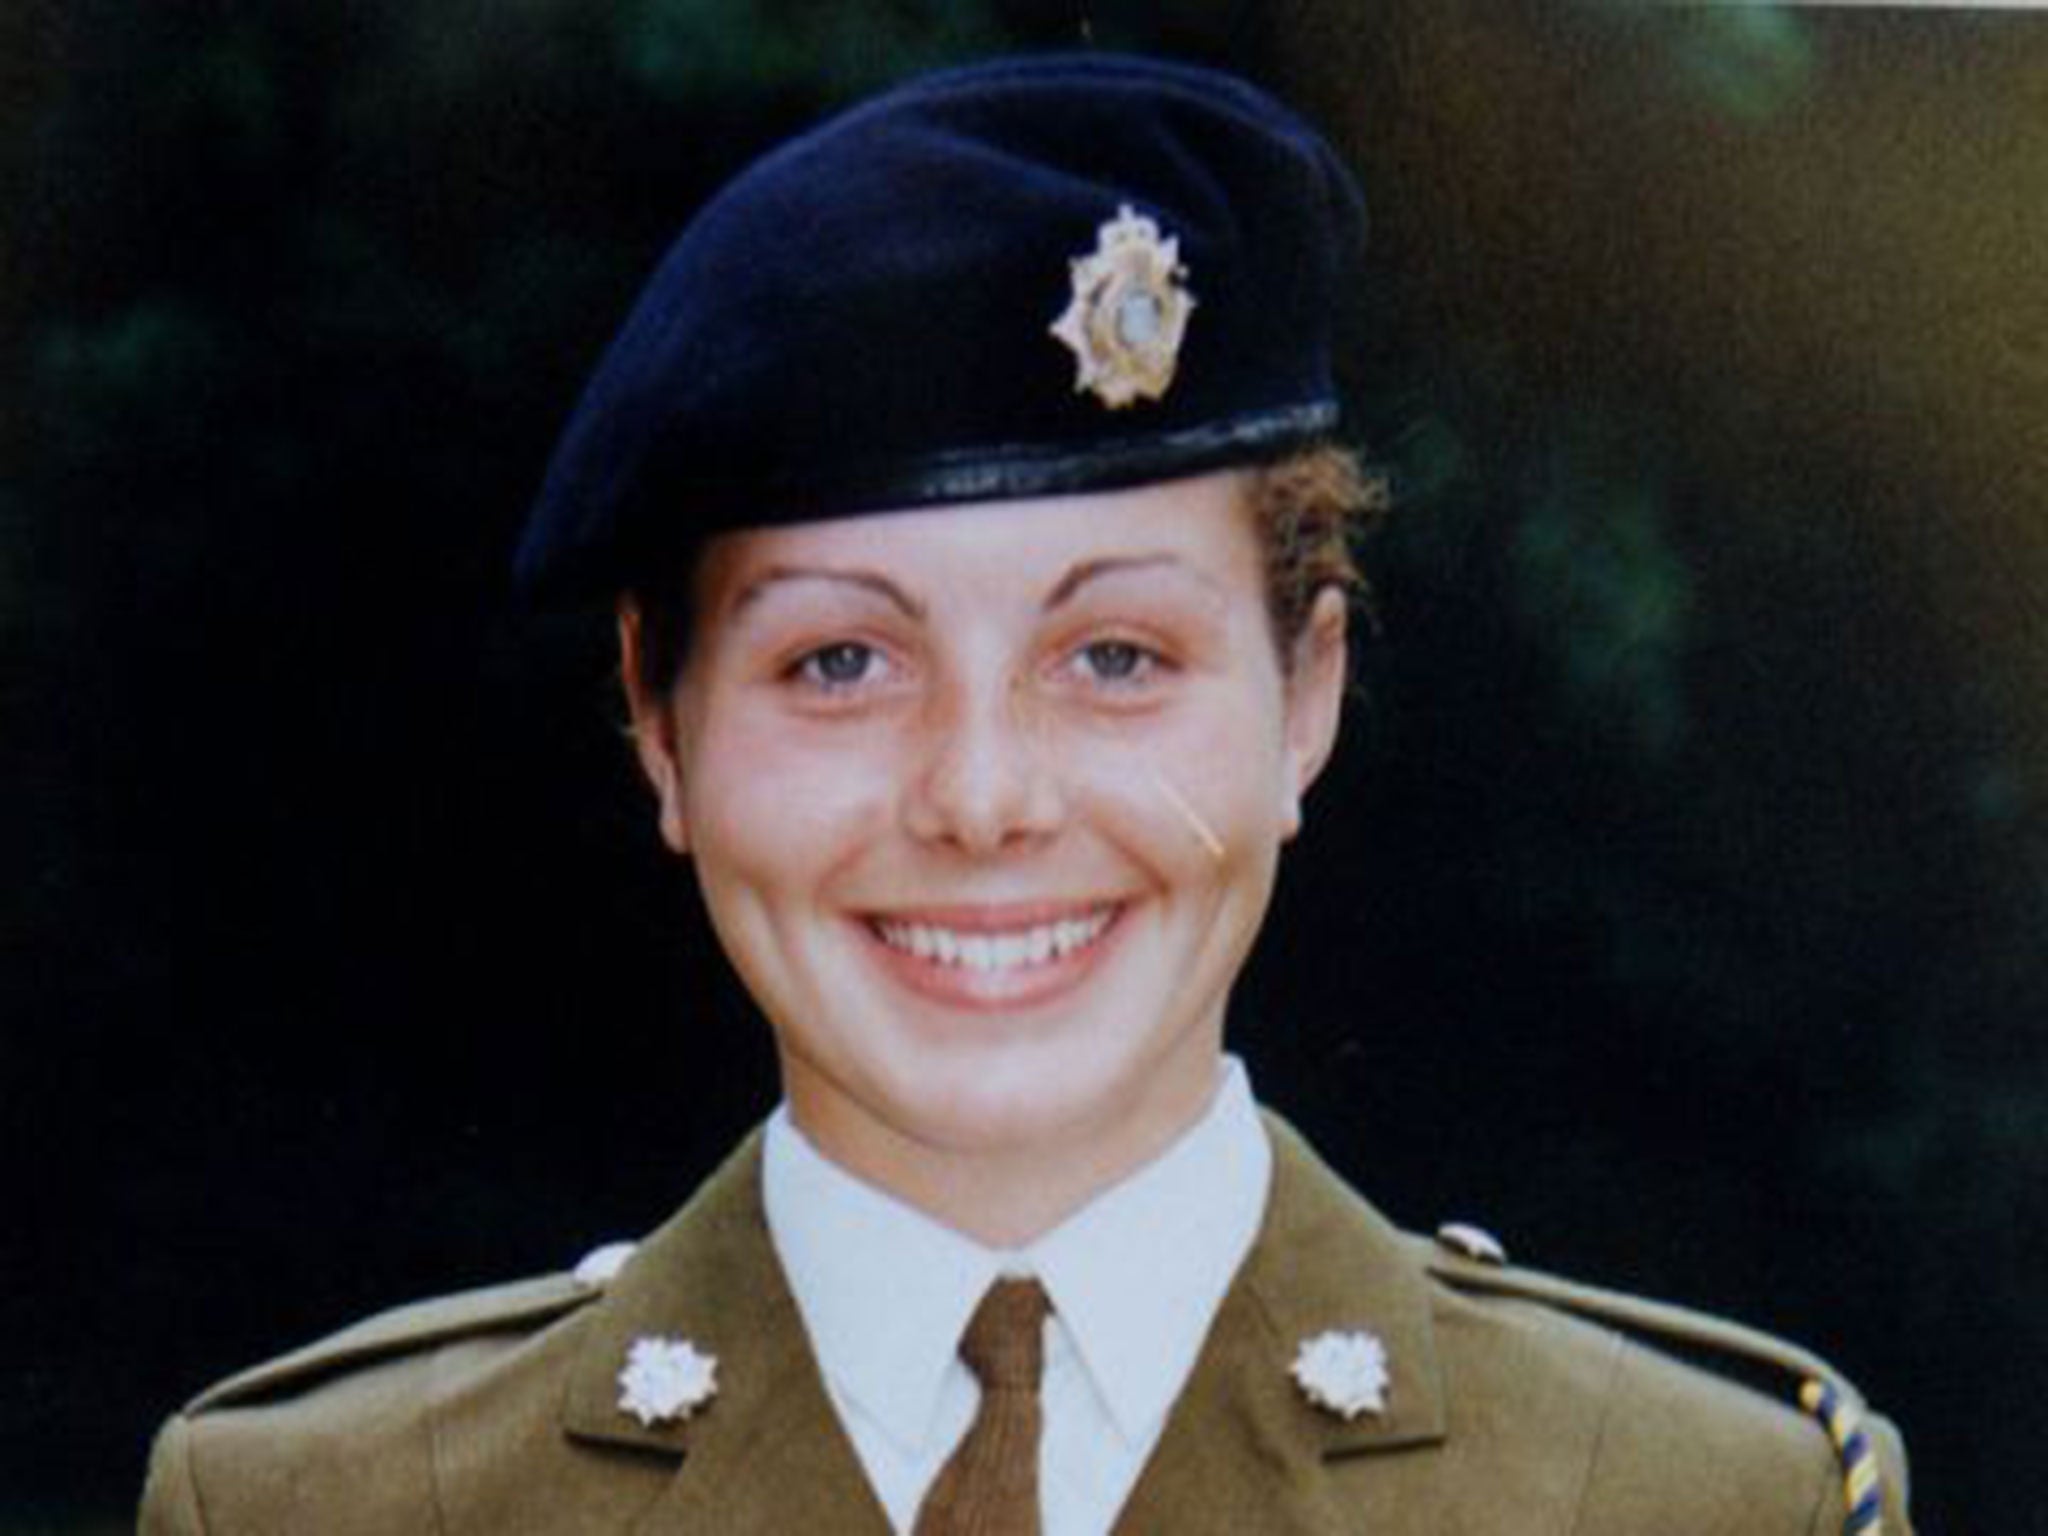 New evidence suggests Private Cheryl James may have been raped the night before she was found dead at Deepcut in 1995